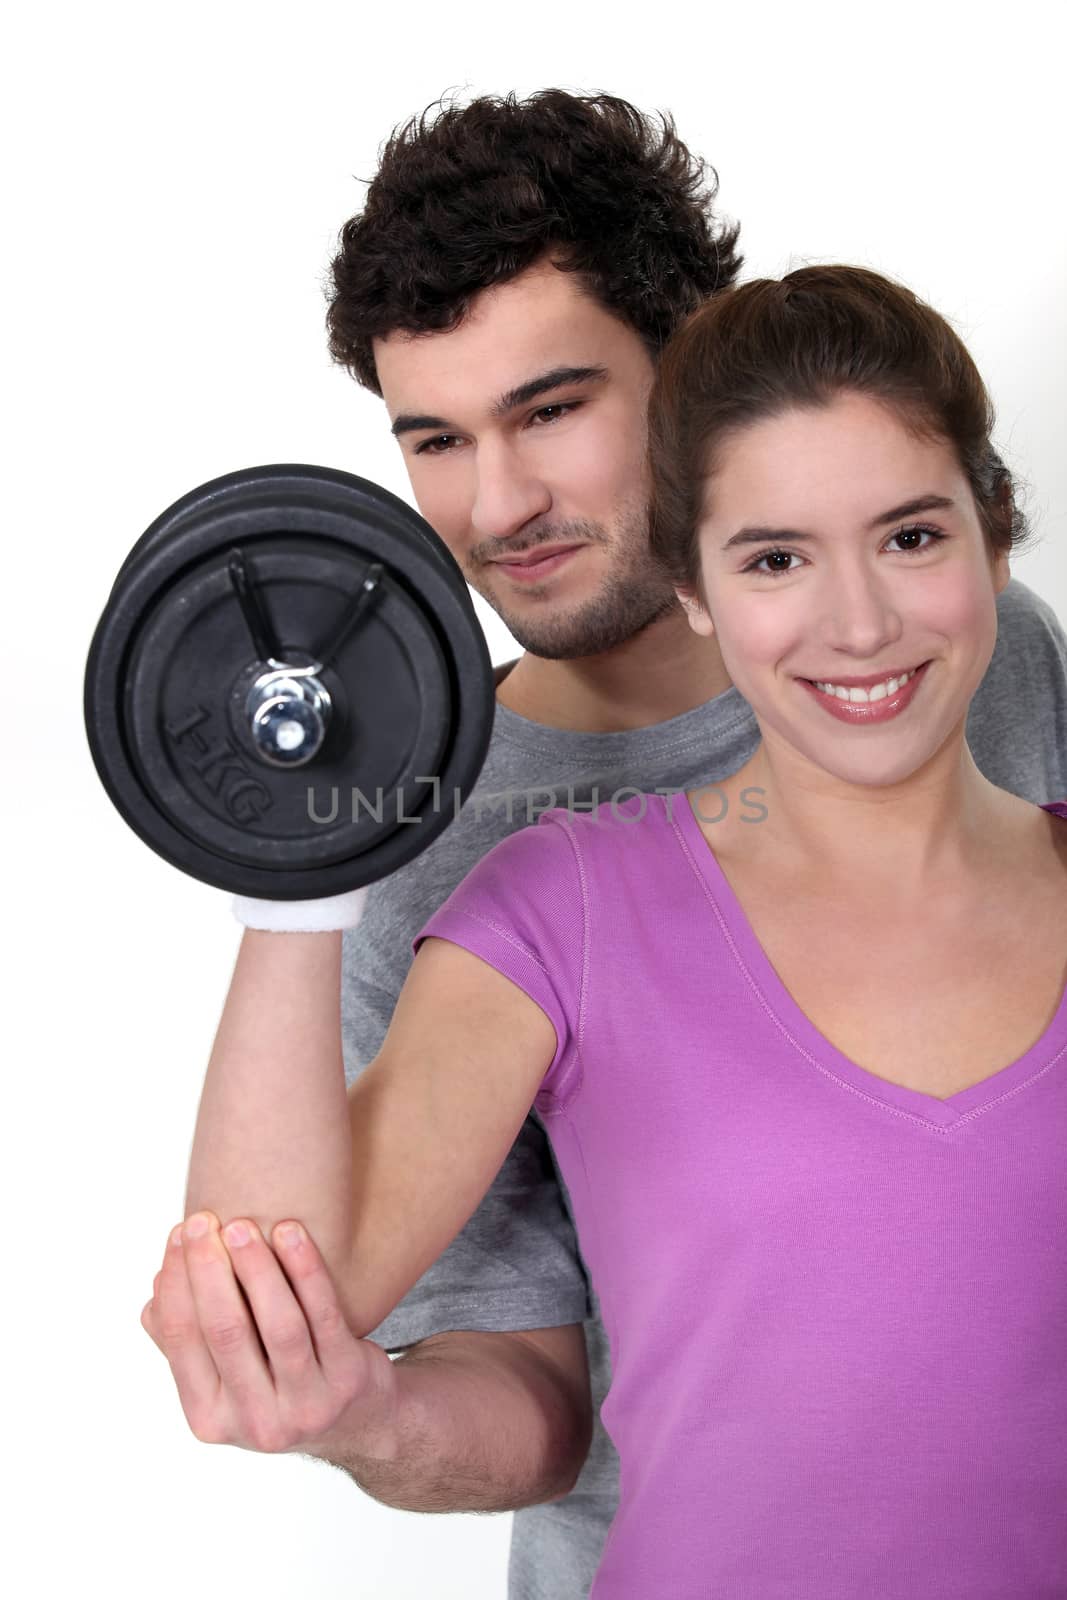 coach and young woman all smiles lifting weight